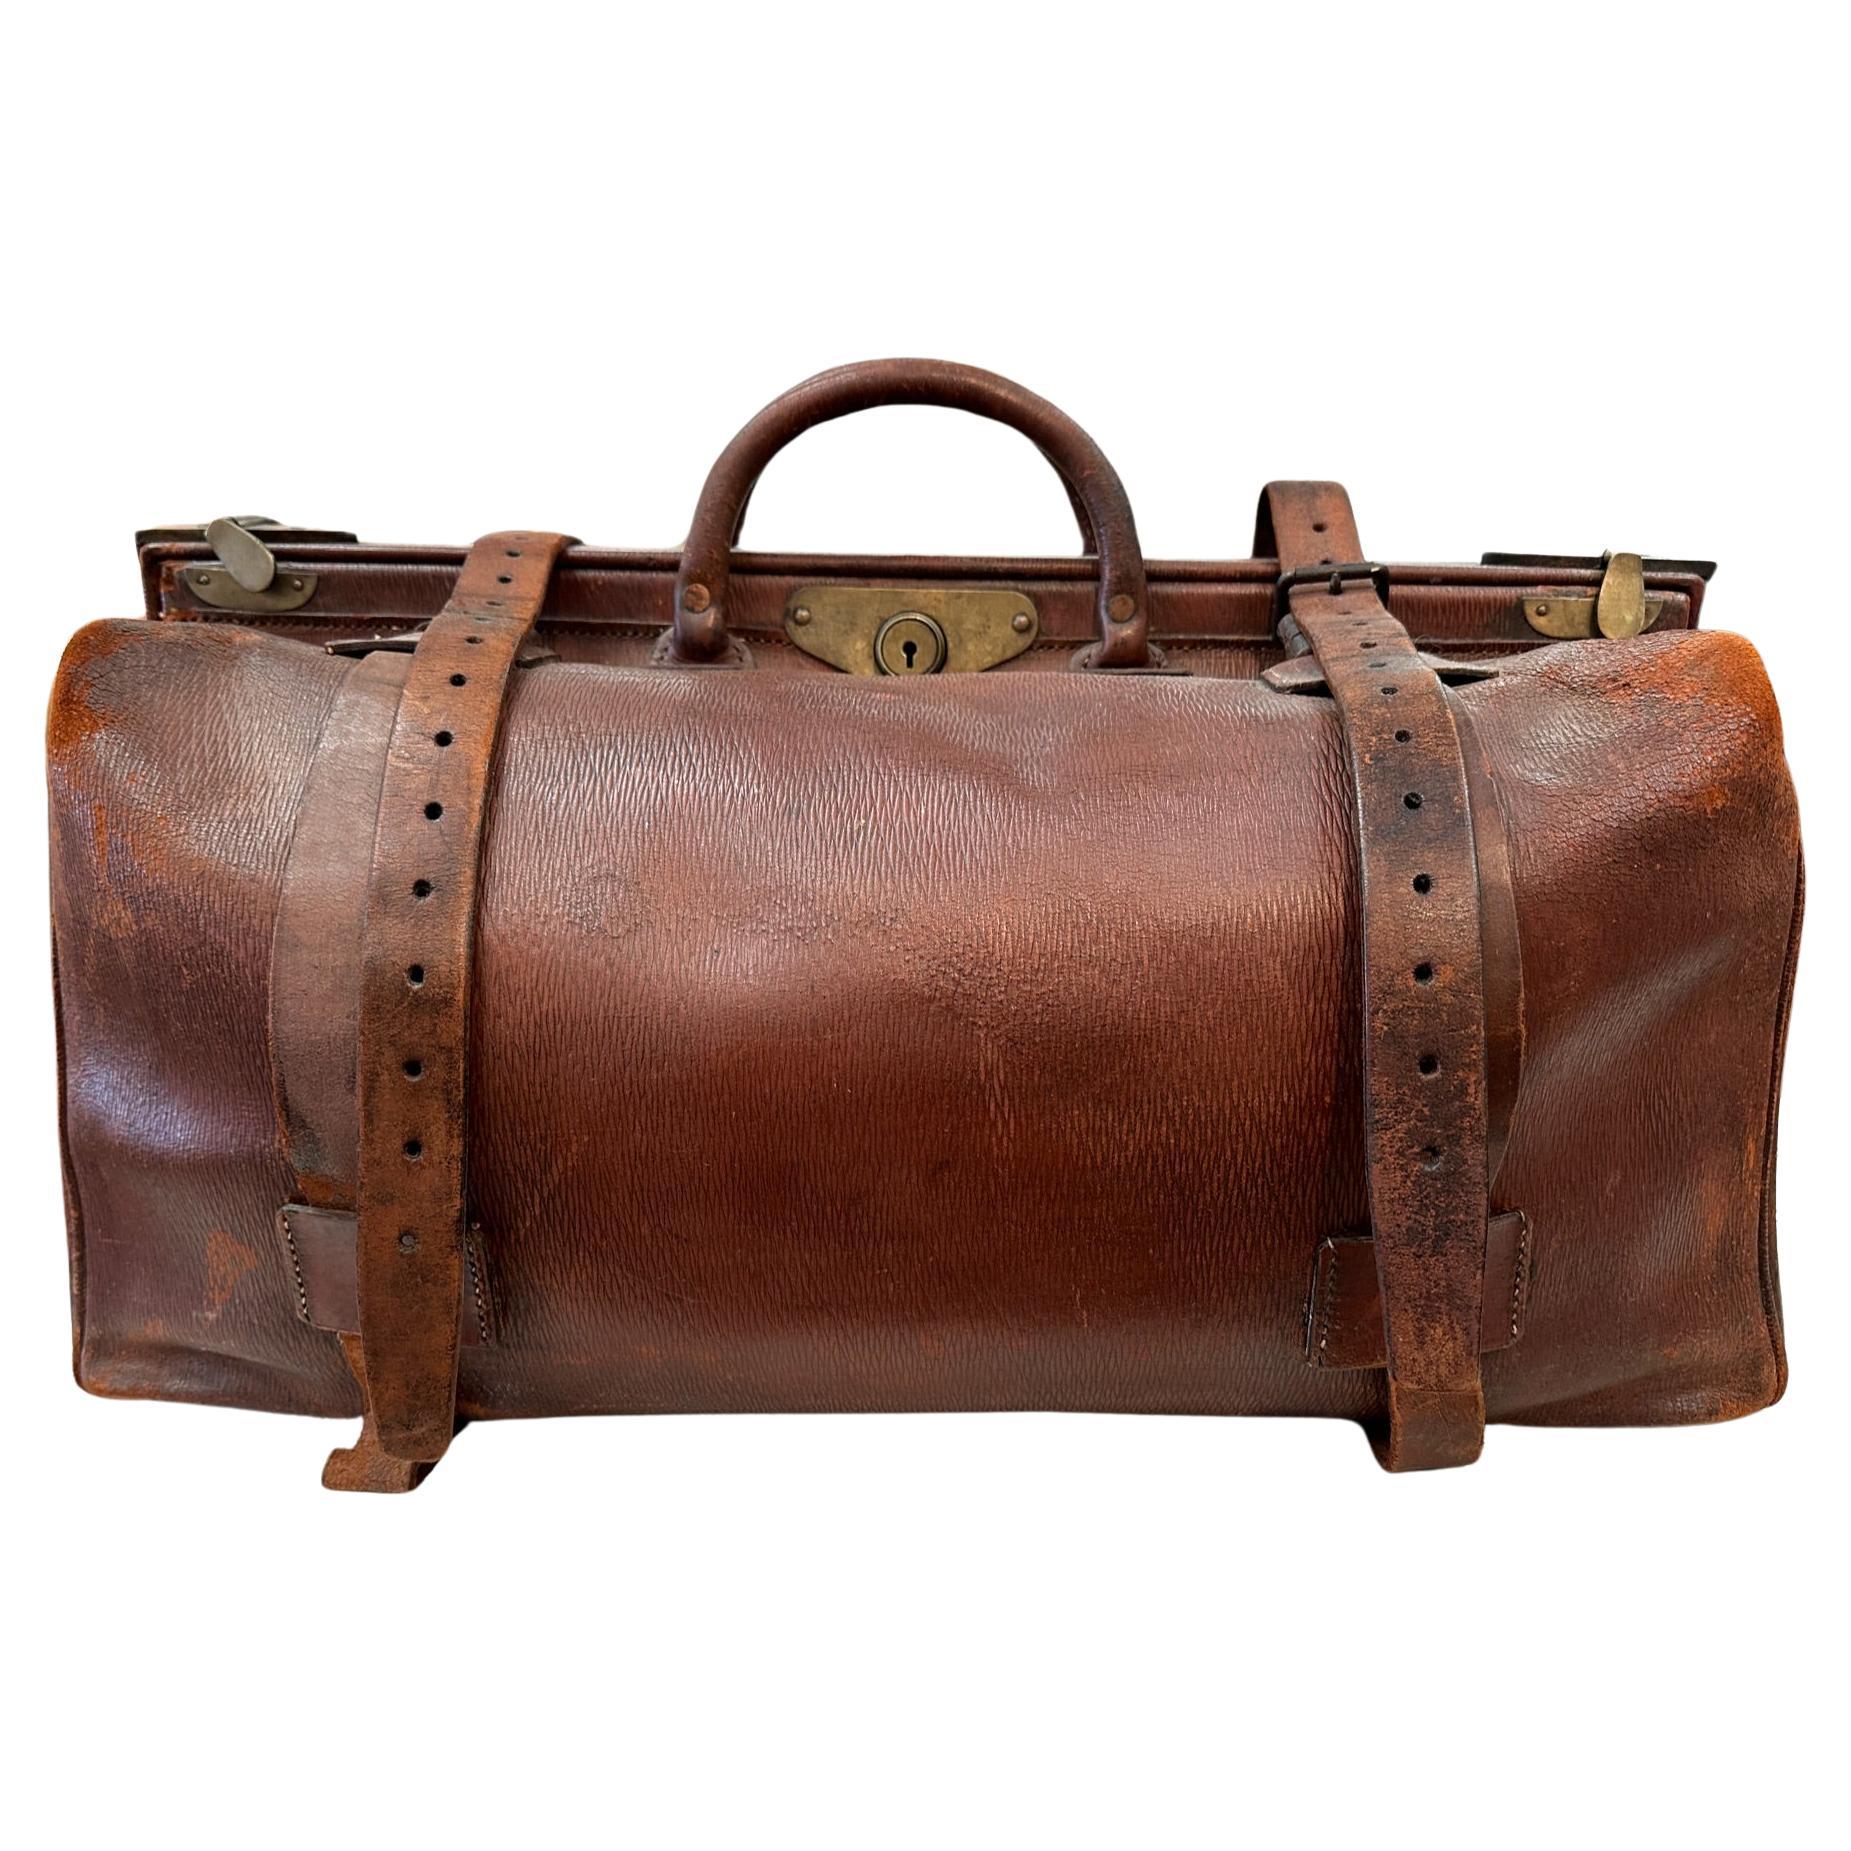 Empire 19th Century Large Antique Leather Traveling Luggage with Brass Accents For Sale